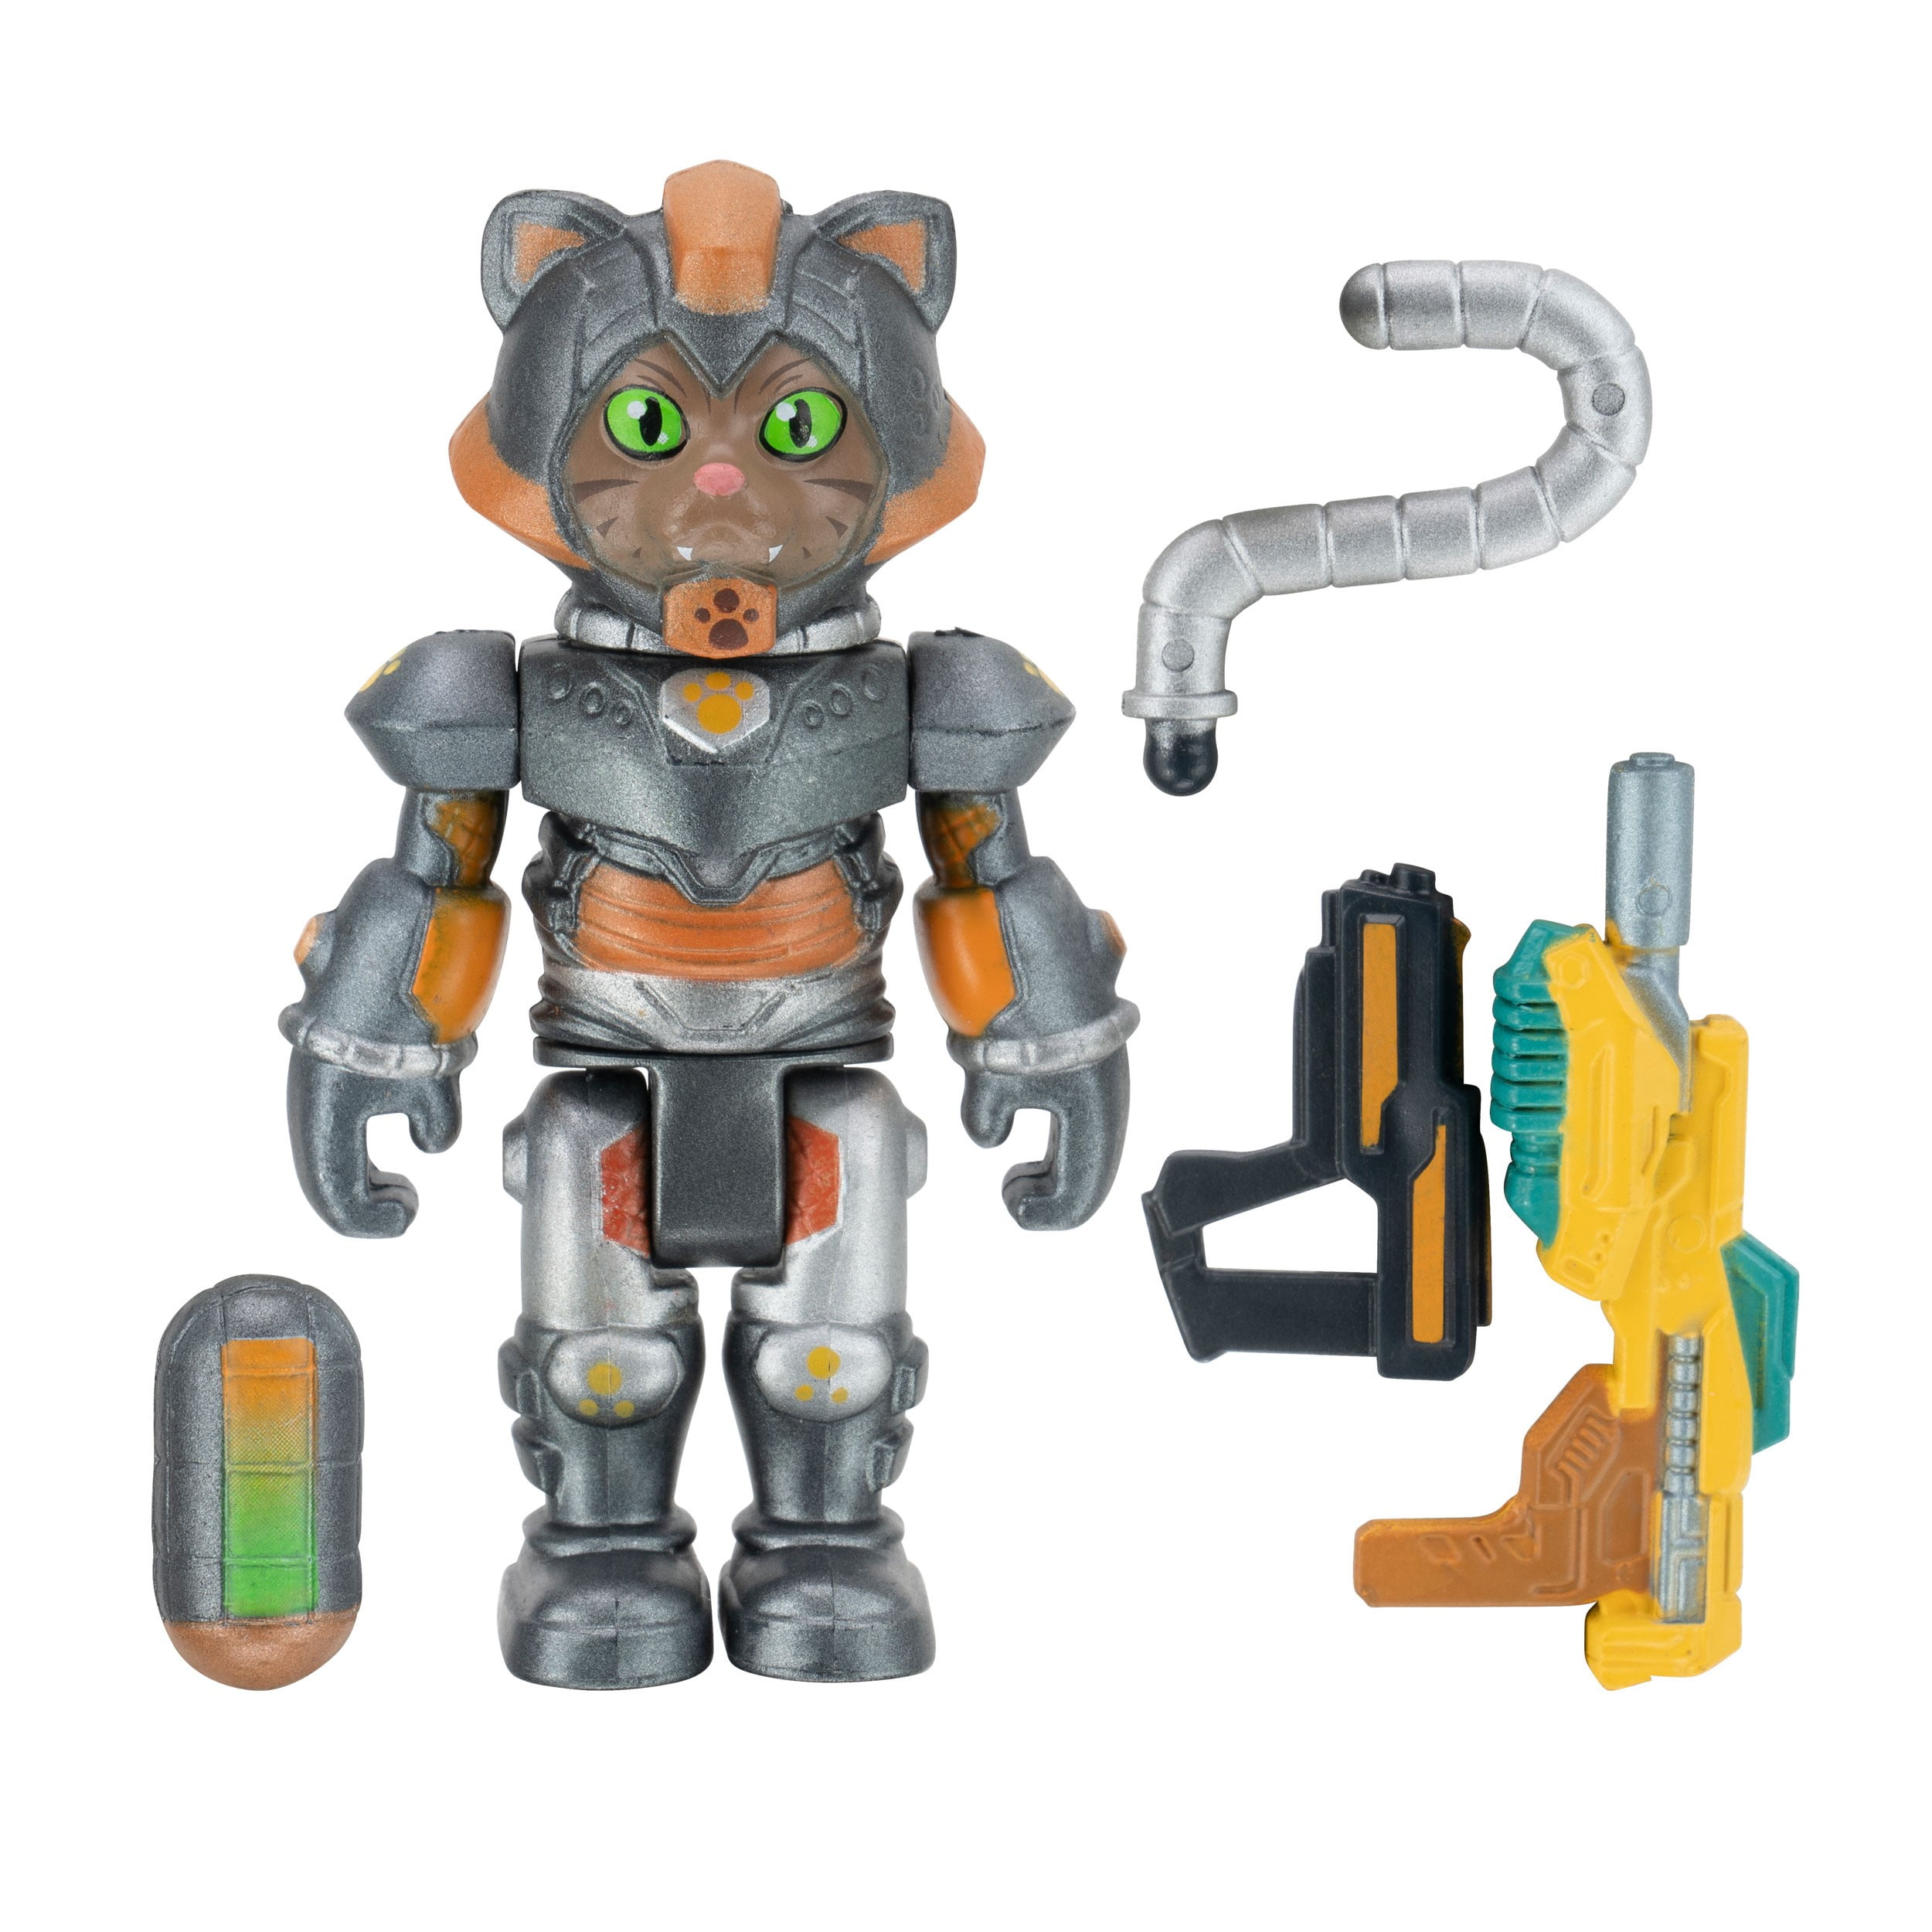 Genre Footpad basketball Roblox Celebrity Collection - Cats...In Space: Sergeant Tabbs Figure Pack  [Includes Exclusive Virtual Item] - Walmart.com